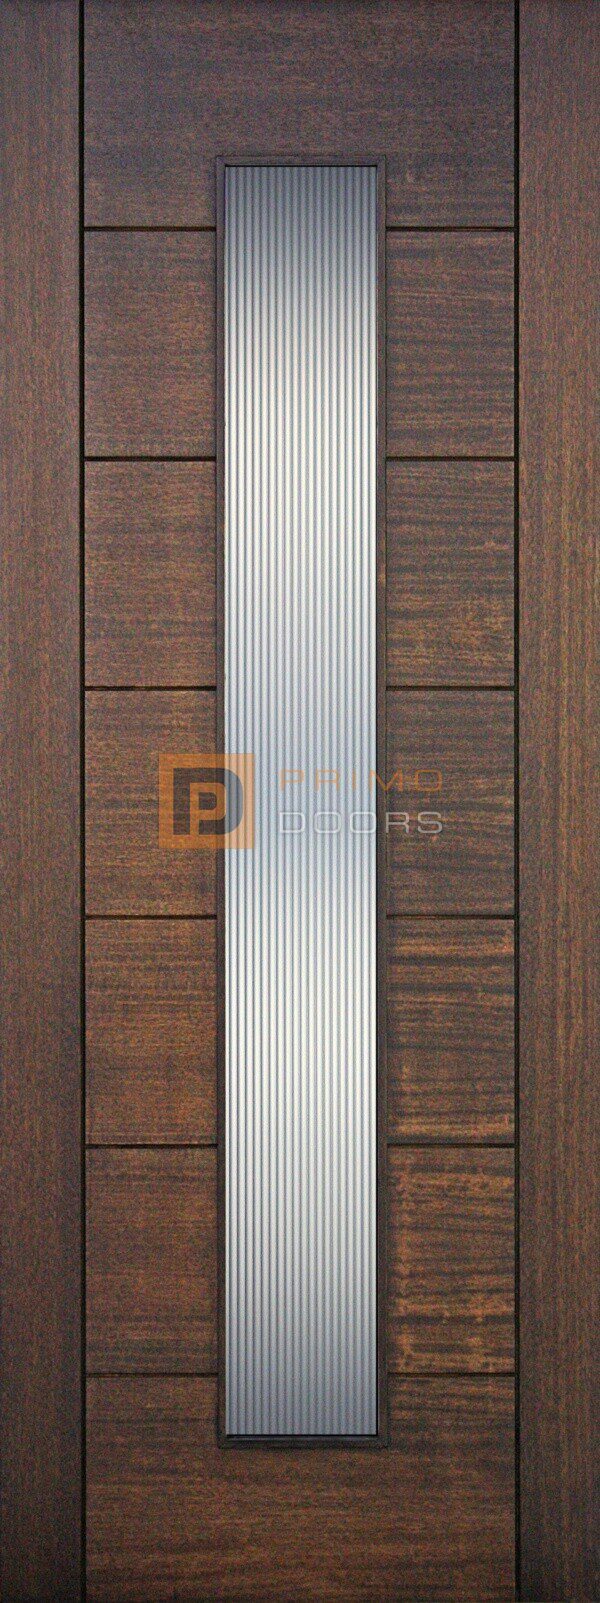 8' Mahogany Wood Contemporary Door with 1 Lite Glass Options - 3-6x8-0_Mahogany_1_Lite_Vertical_Reeded